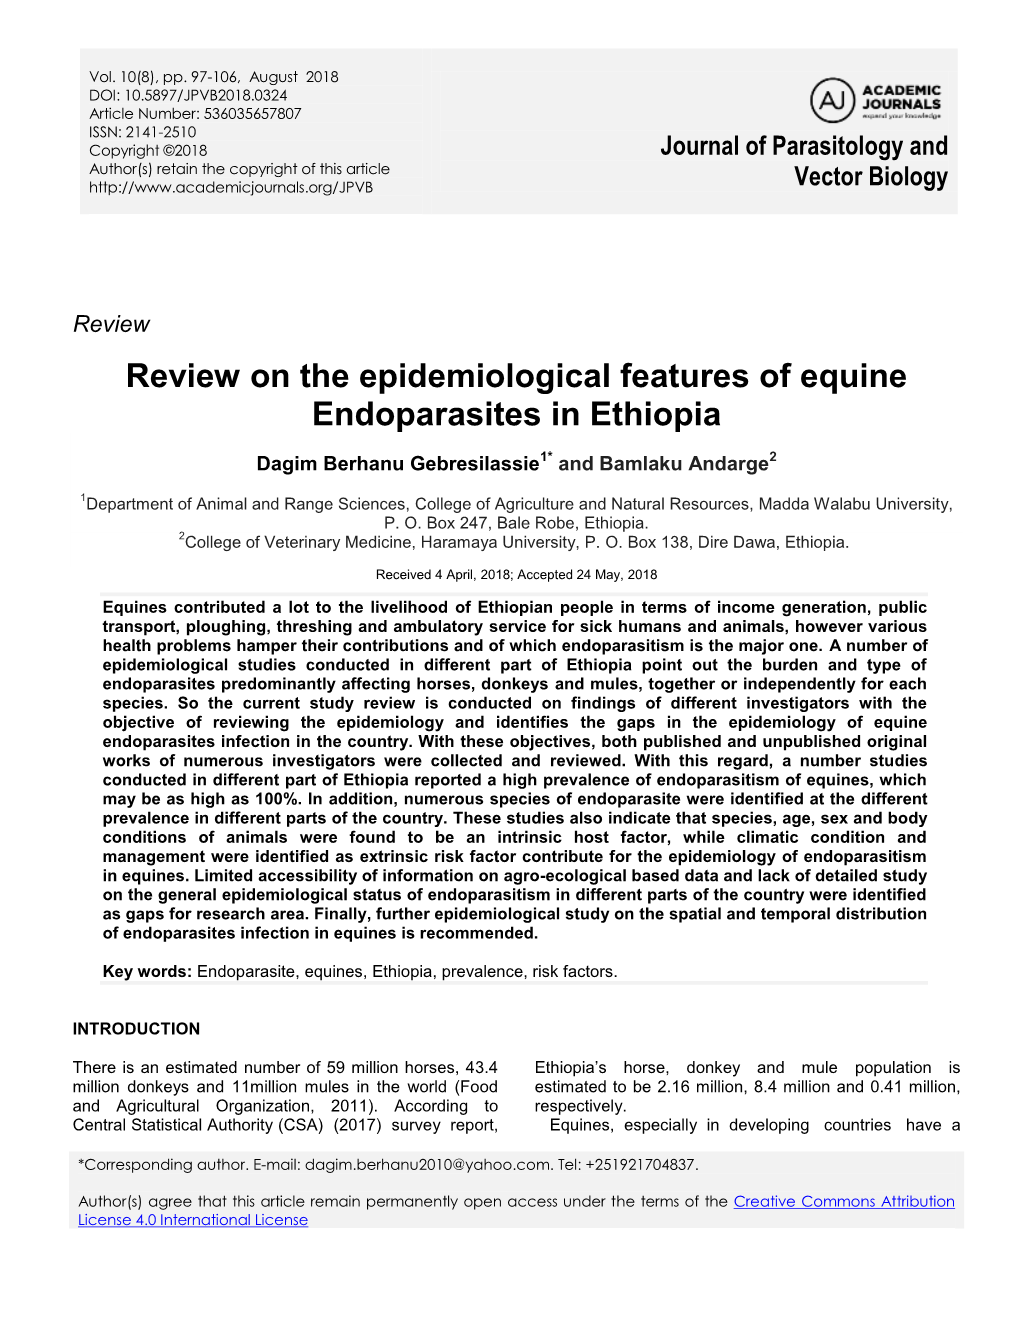 Review on the Epidemiological Features of Equine Endoparasites in Ethiopia